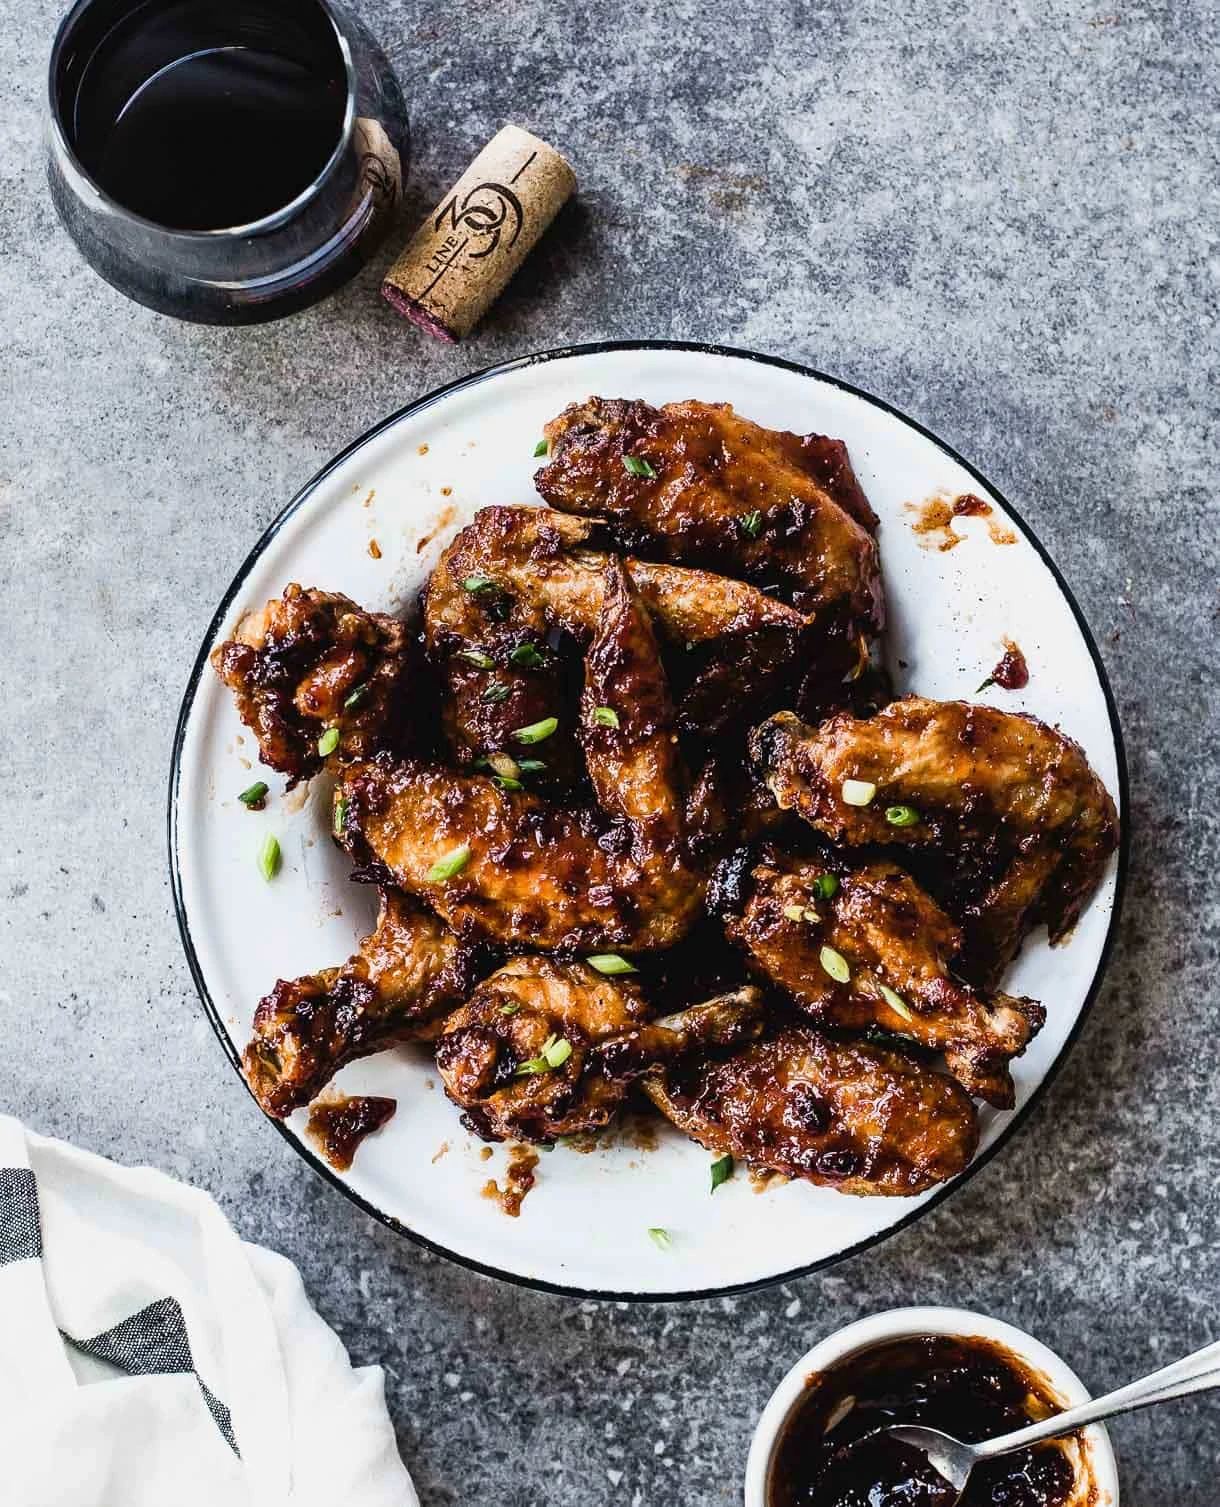 Four Secrets to Making Gloriously Crispy Baked Chicken Wings + Maple Chipotle Sauce (gluten free chicken wings recipe)